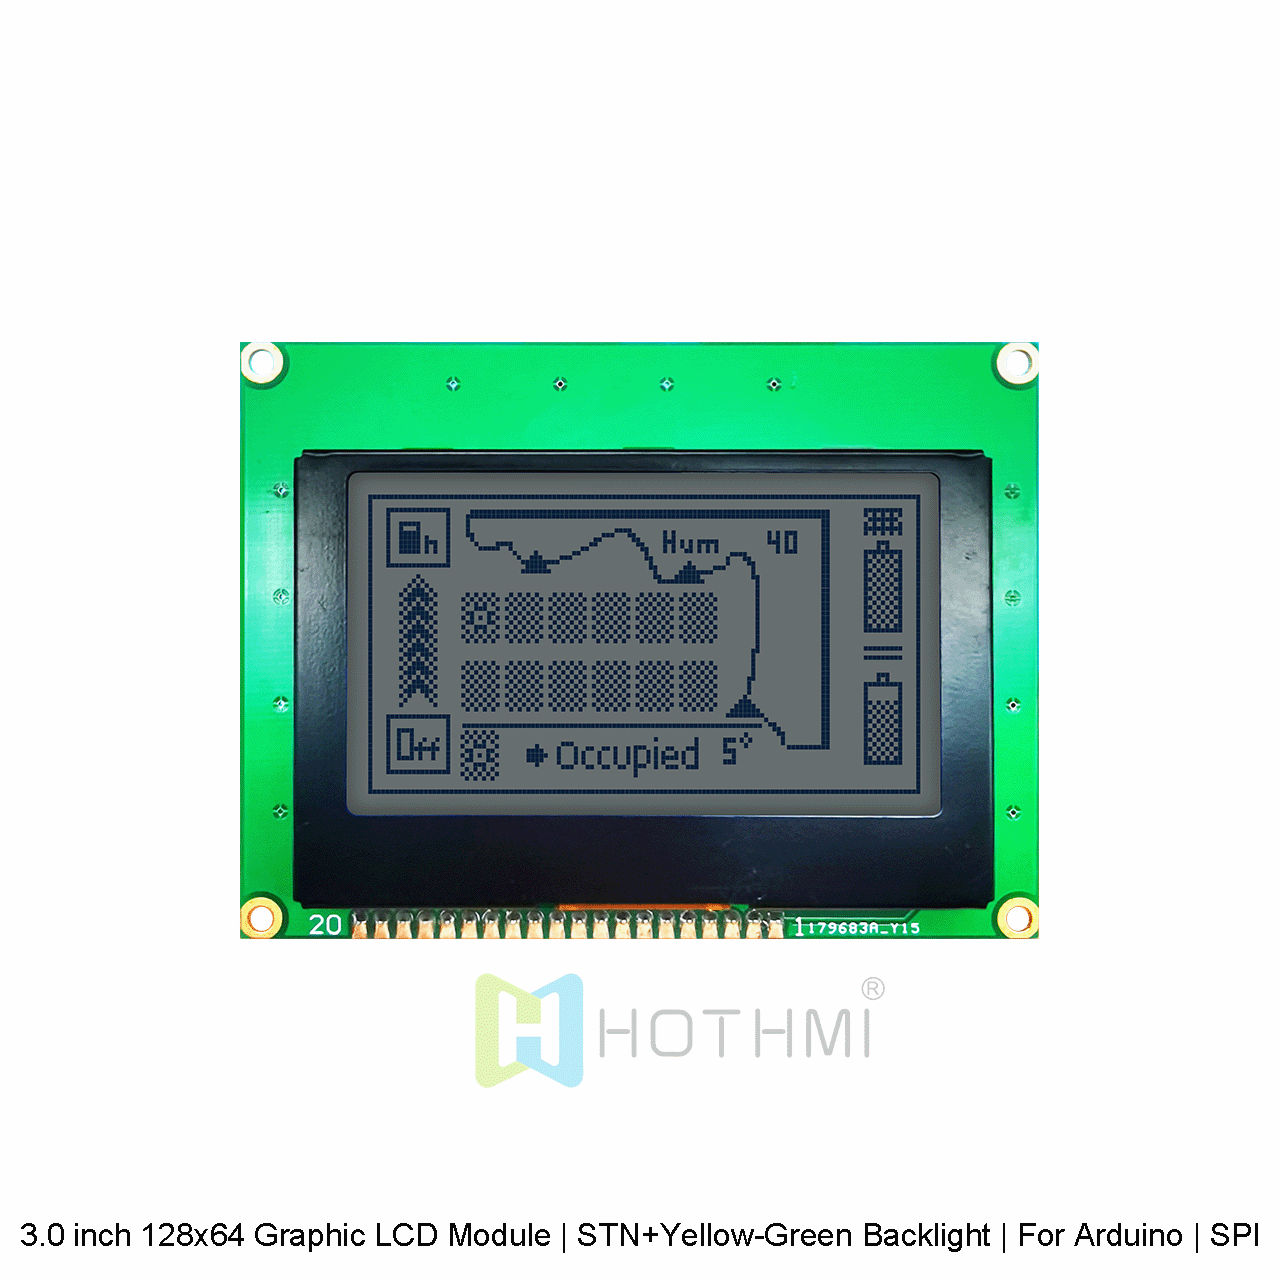 3.0 inch 128x64 Graphic LCD Module | STN+Yellow-Green Backlight | For Arduino | SPI Interface | 3.3V